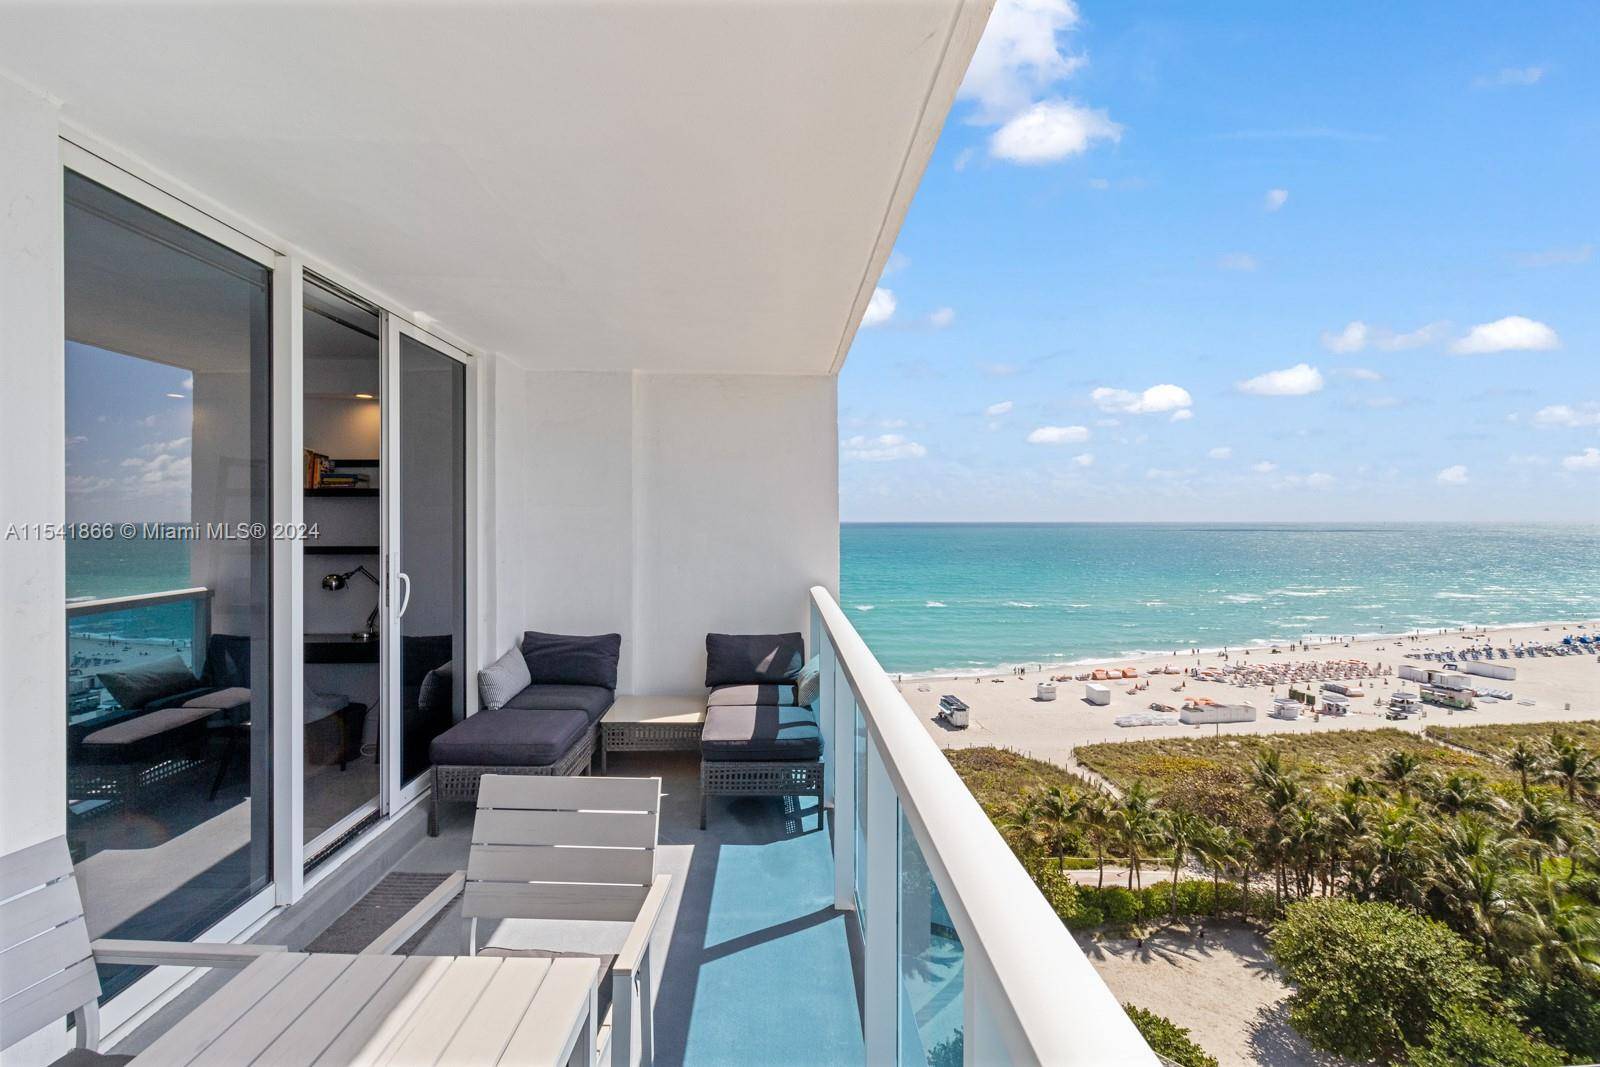 Stunning 2 bed 2 bath oceanfront apartment at the Roney Palace with direct Ocean and City views.